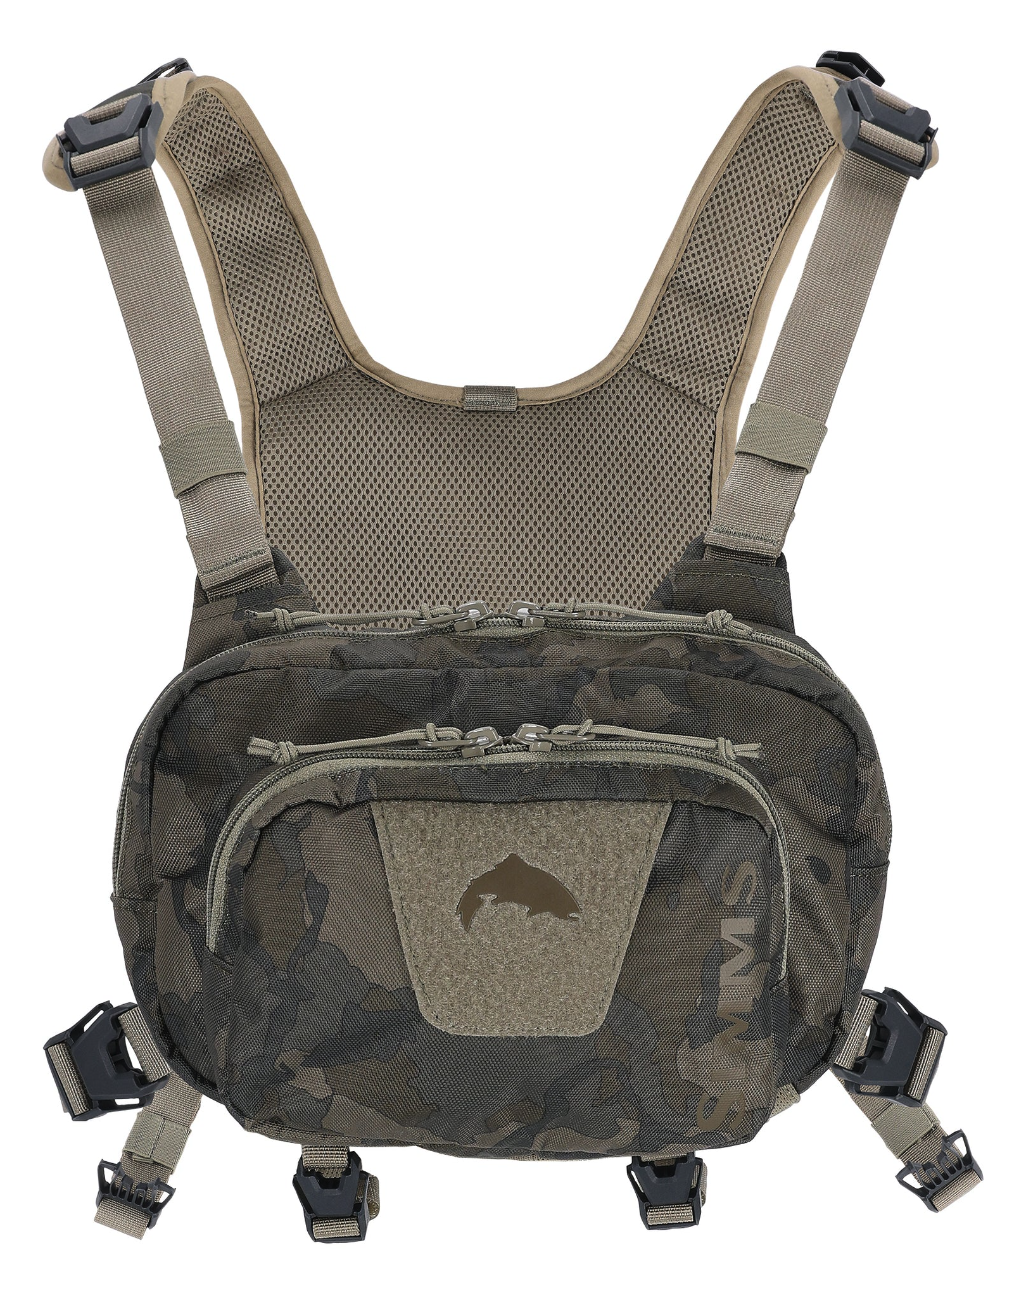 Buy Simms Tributary Hybrid Chest Pack online for a comfortable fishing chest pack.